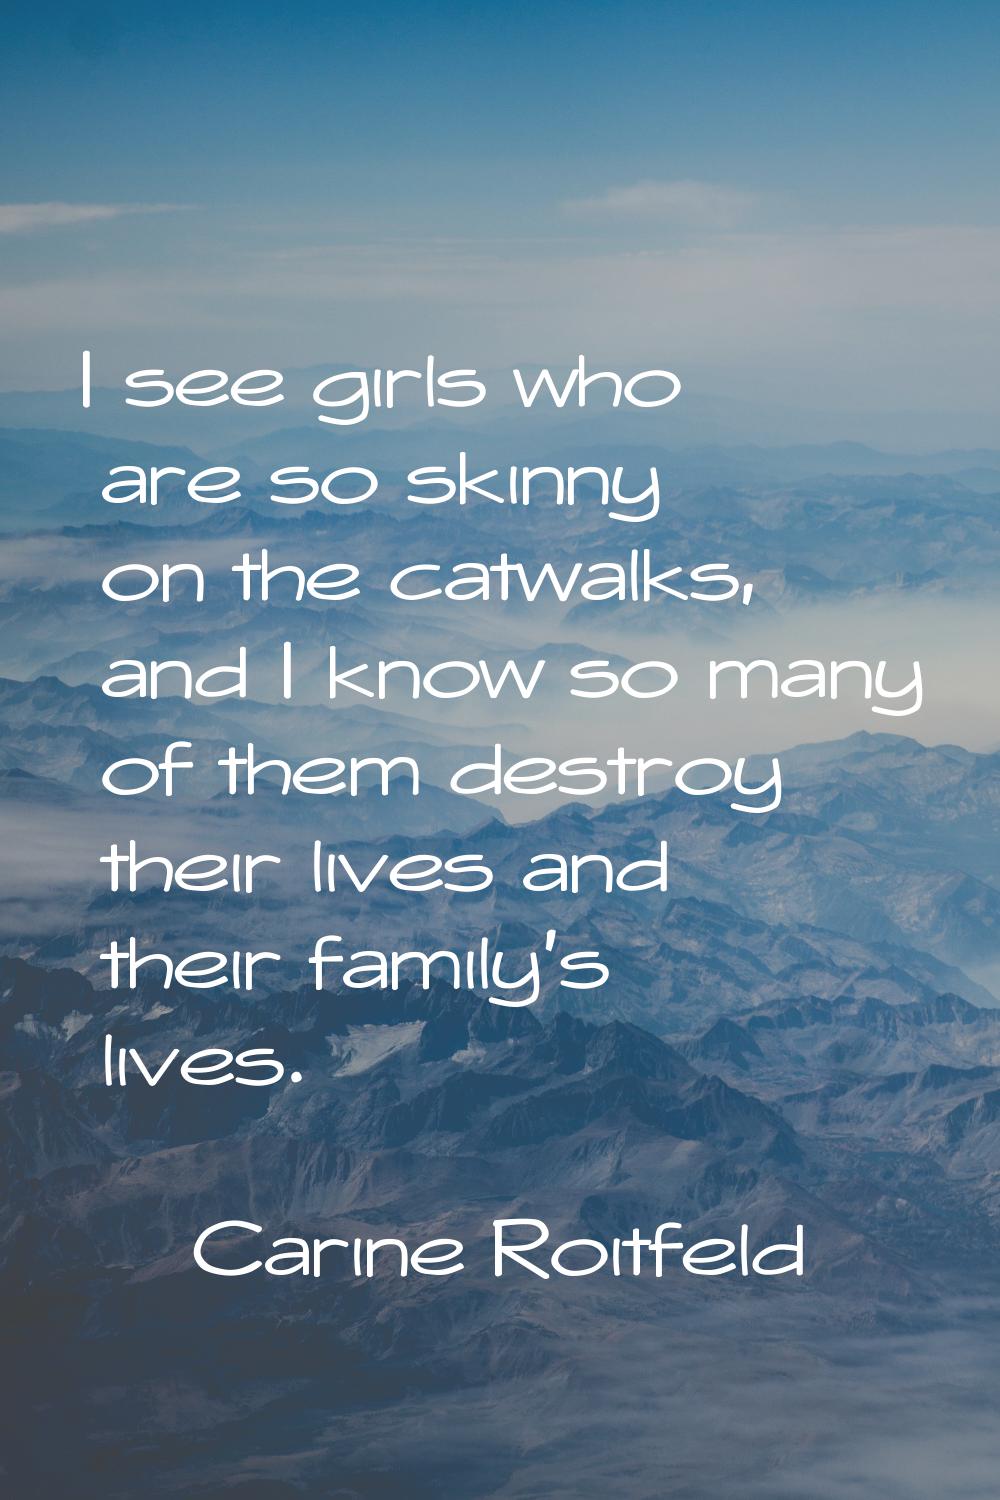 I see girls who are so skinny on the catwalks, and I know so many of them destroy their lives and t